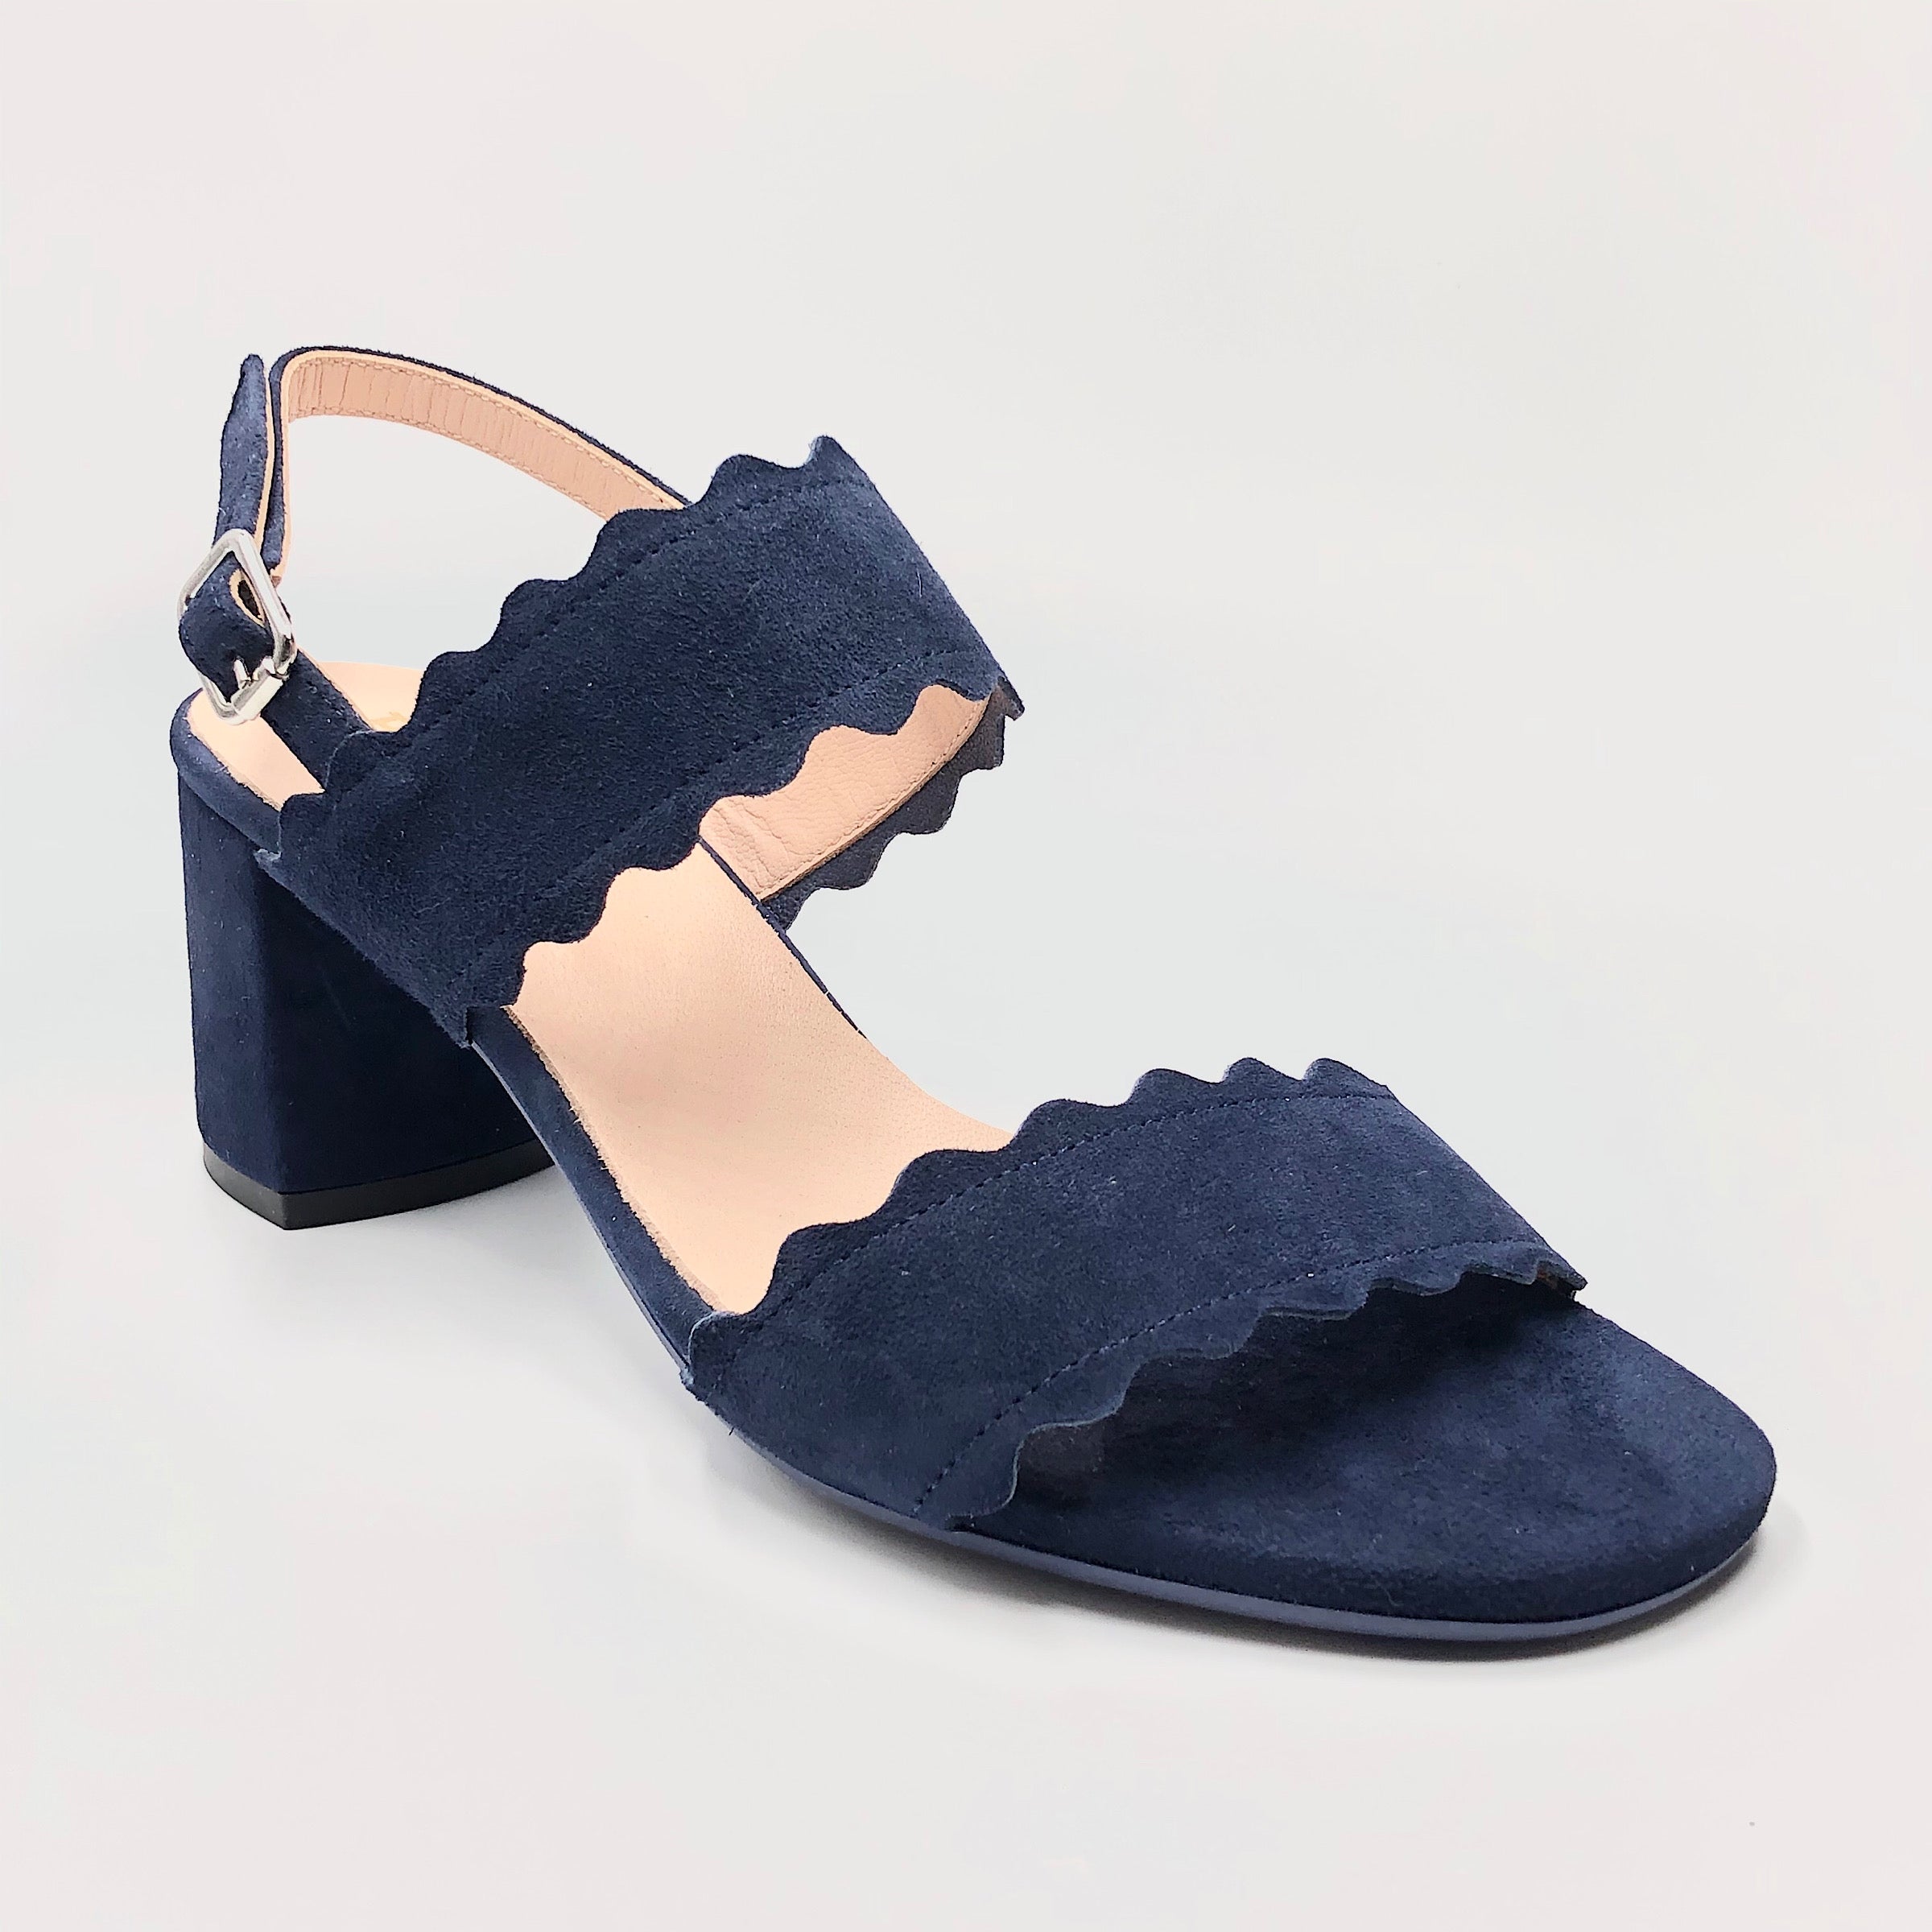 Scallop 2 - The Perfect Sandal in Navy